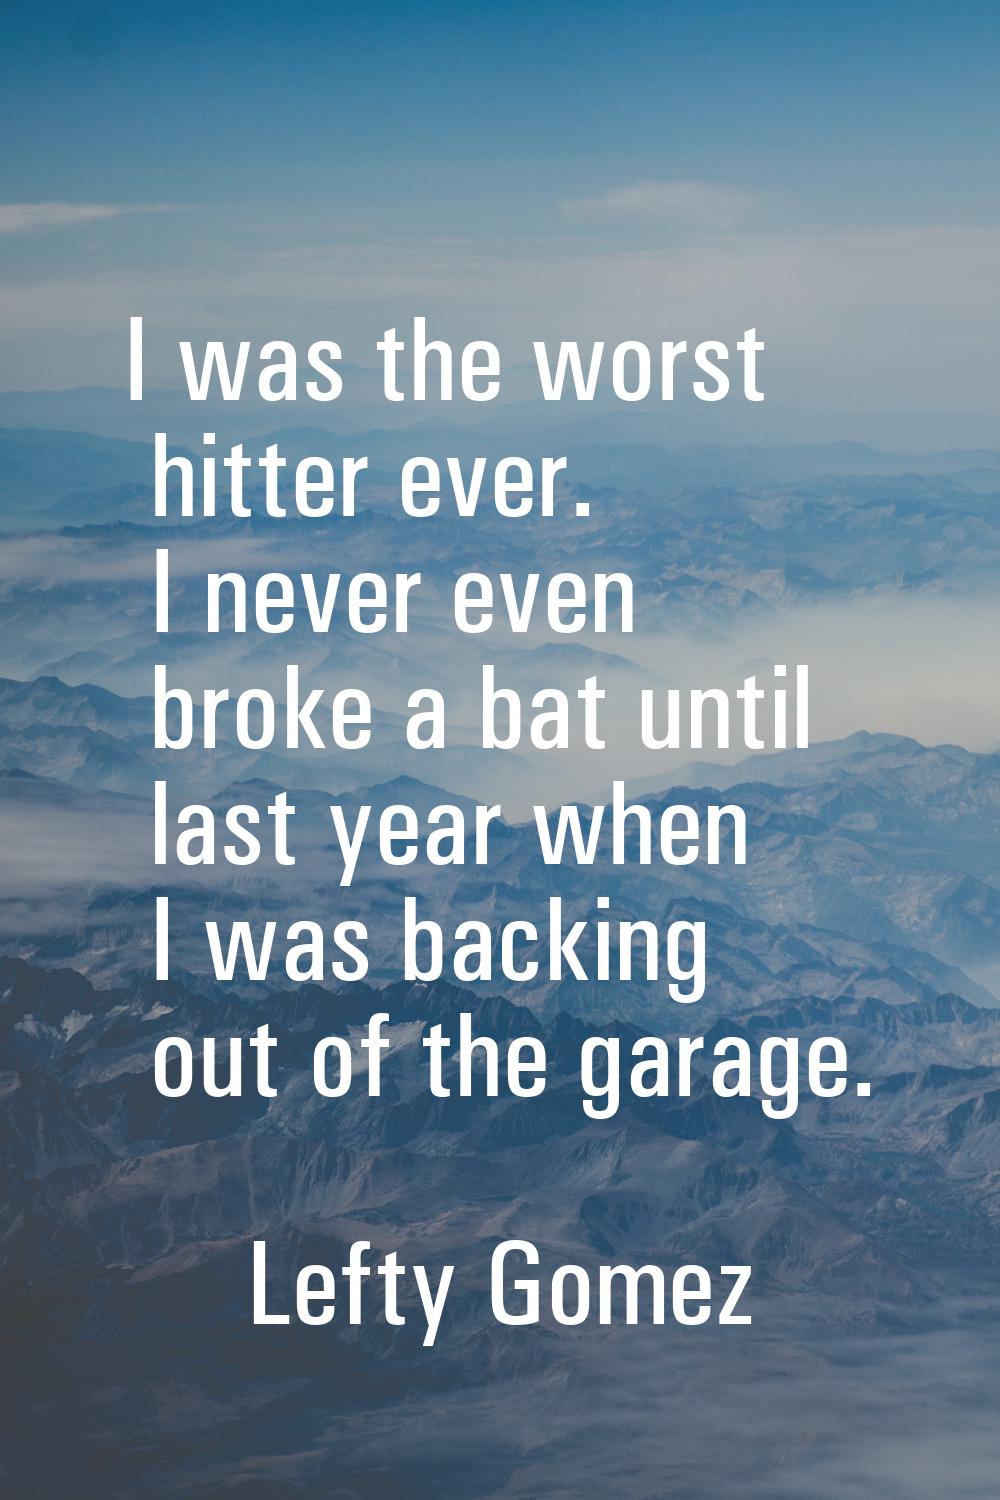 I was the worst hitter ever. I never even broke a bat until last year when I was backing out of the